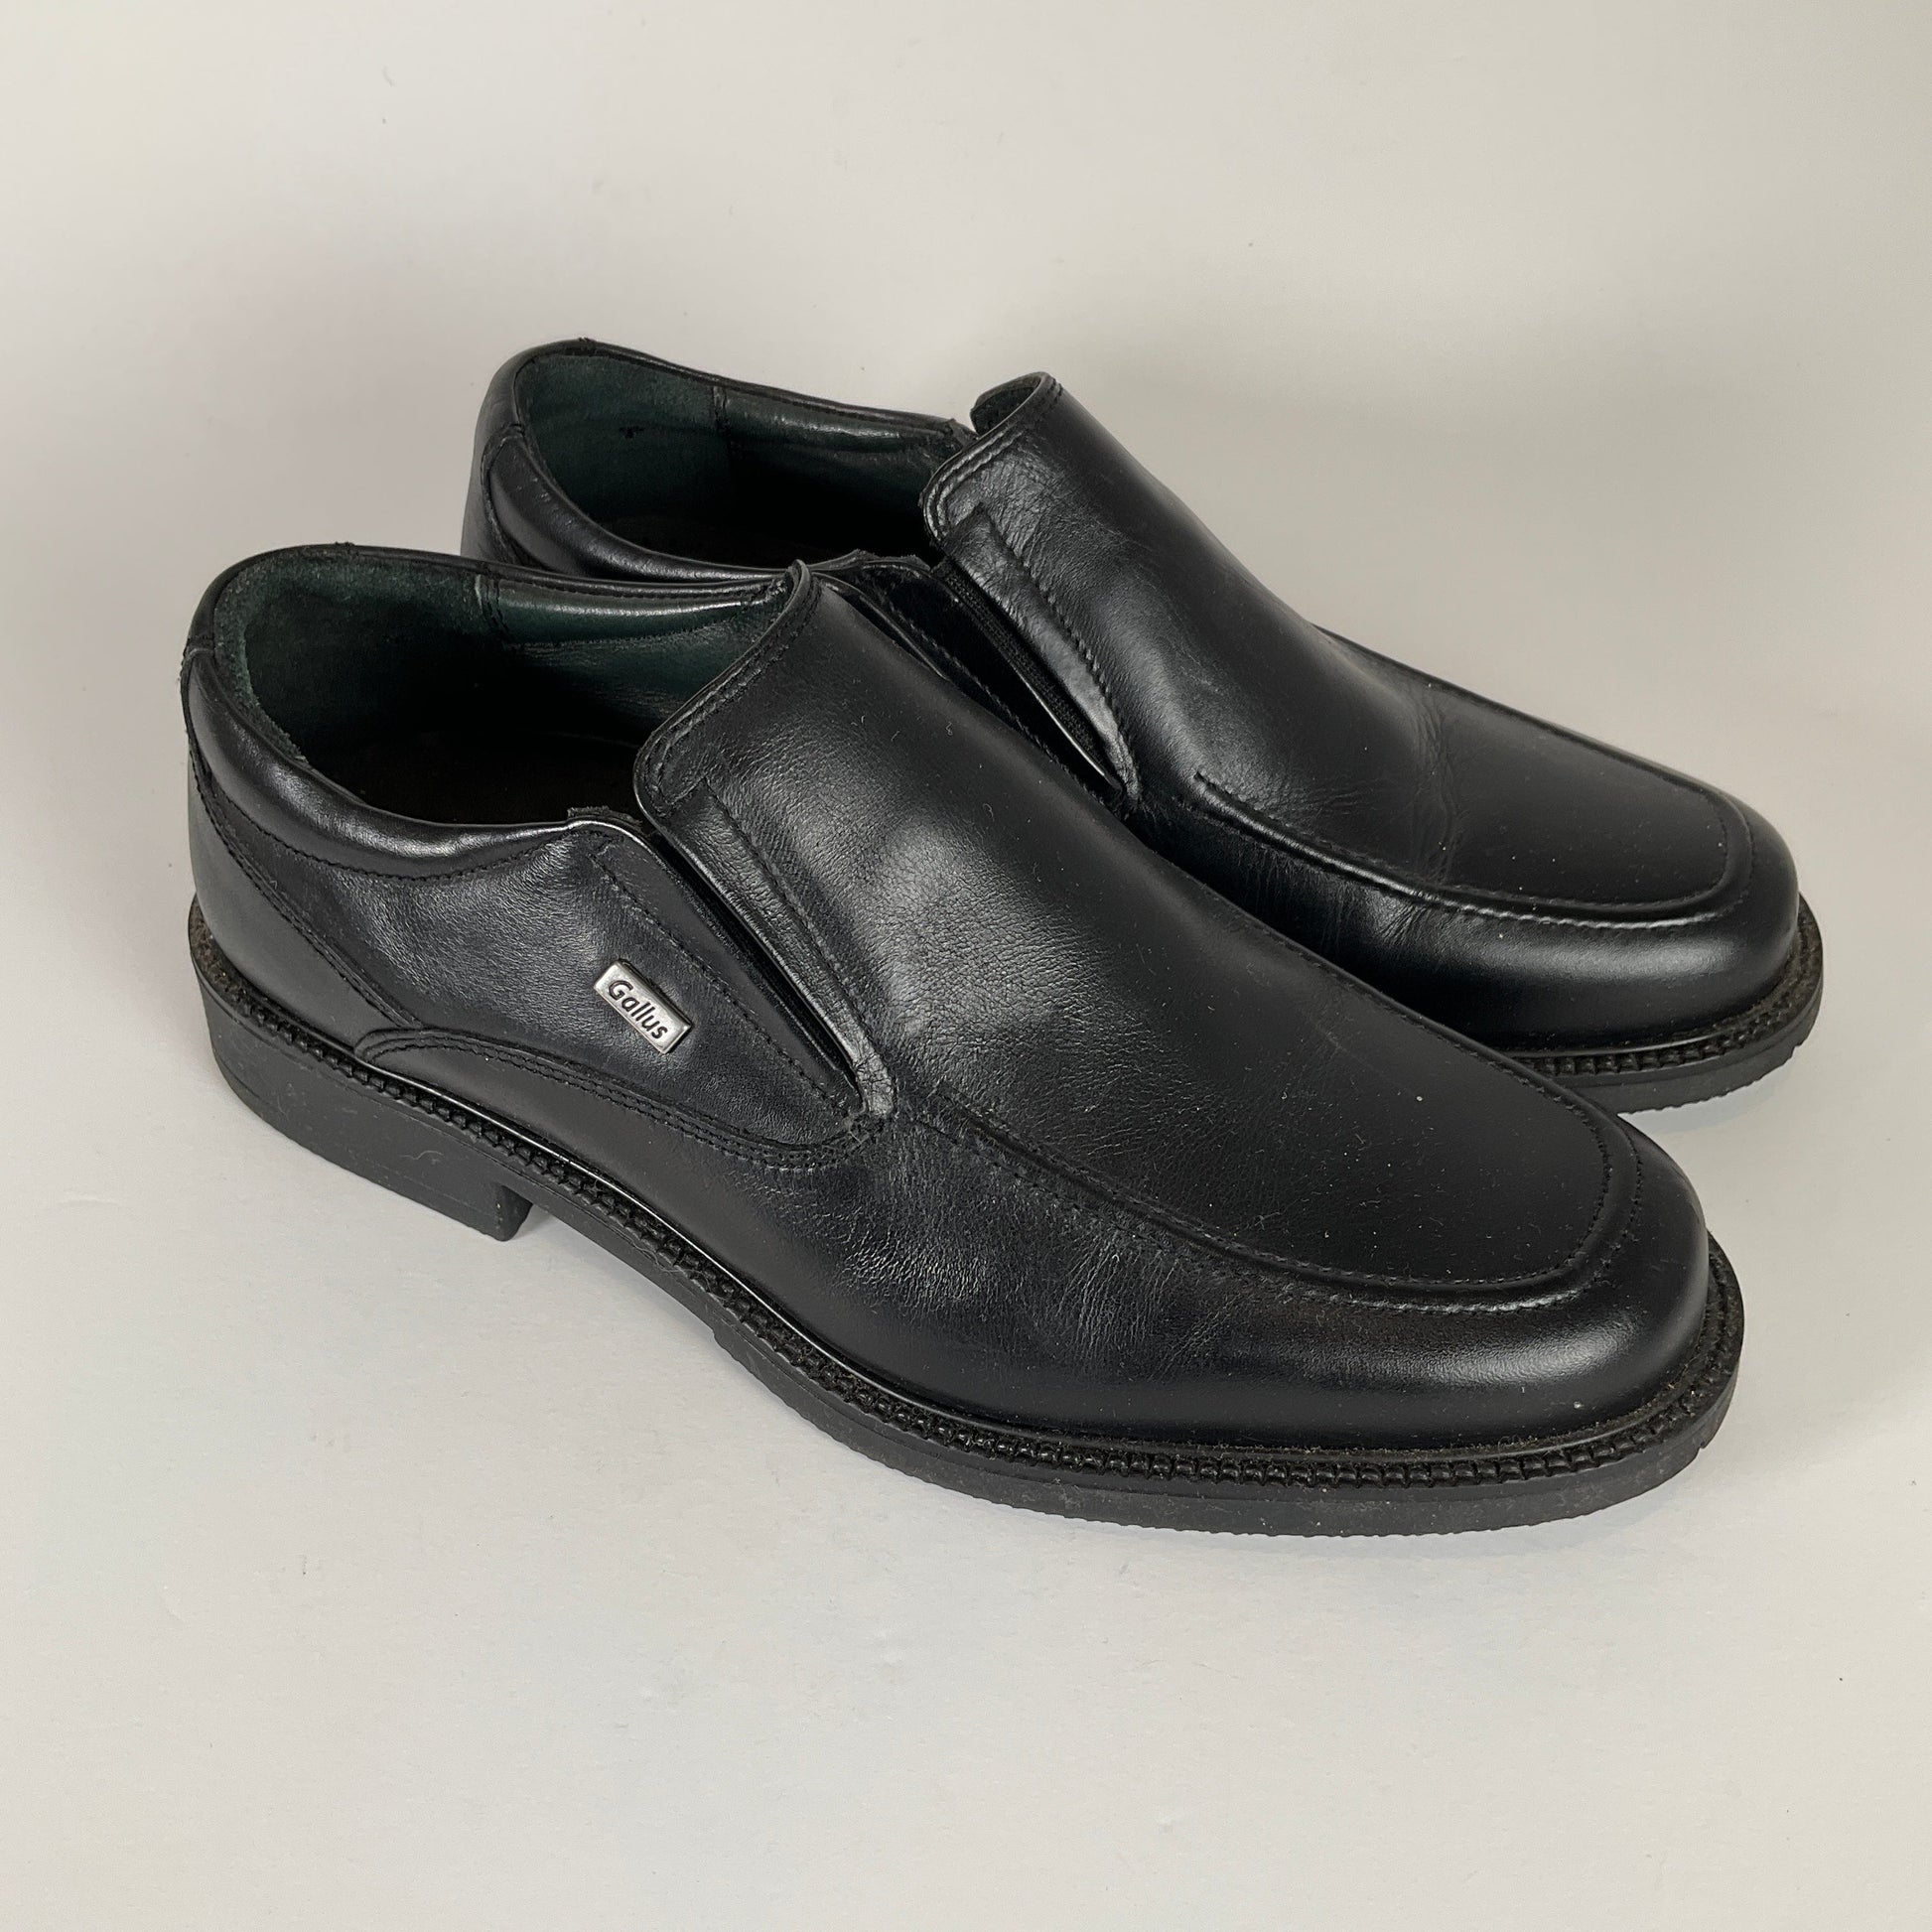 Gallus - Casual Black Shoes Size 6.5